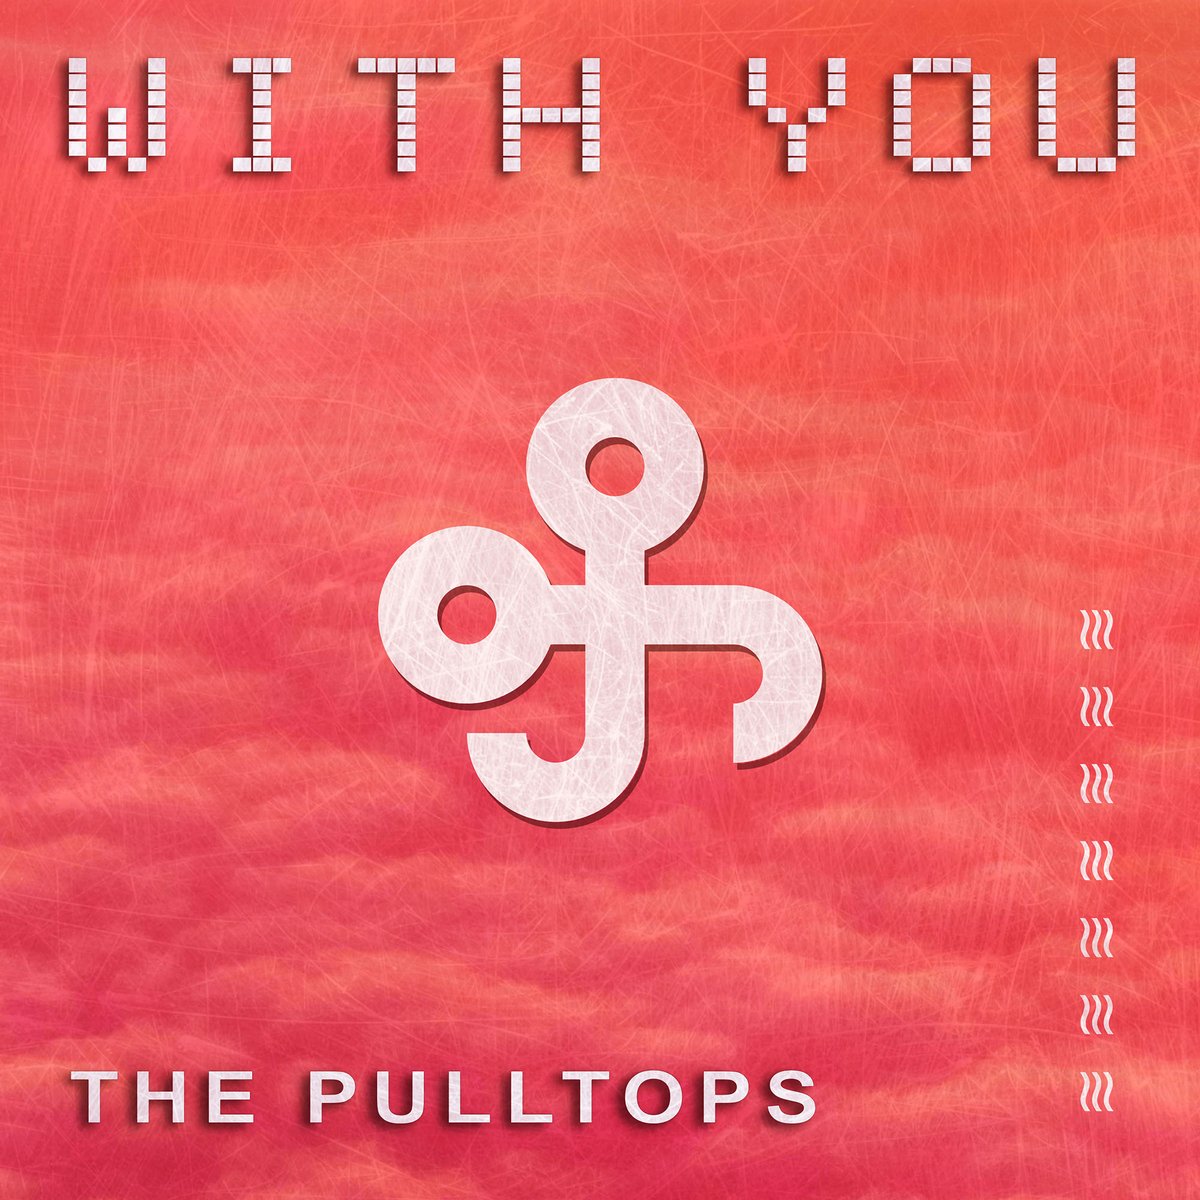 Listen to the single 'With You' and enjoy a stunning new song from the incredible The Pulltops. 
#indiedockmusicblog #singlereview #poprock #indierock #softrock #alternativerock

indiedockmusicblog.co.uk/?p=20124&fbcli…